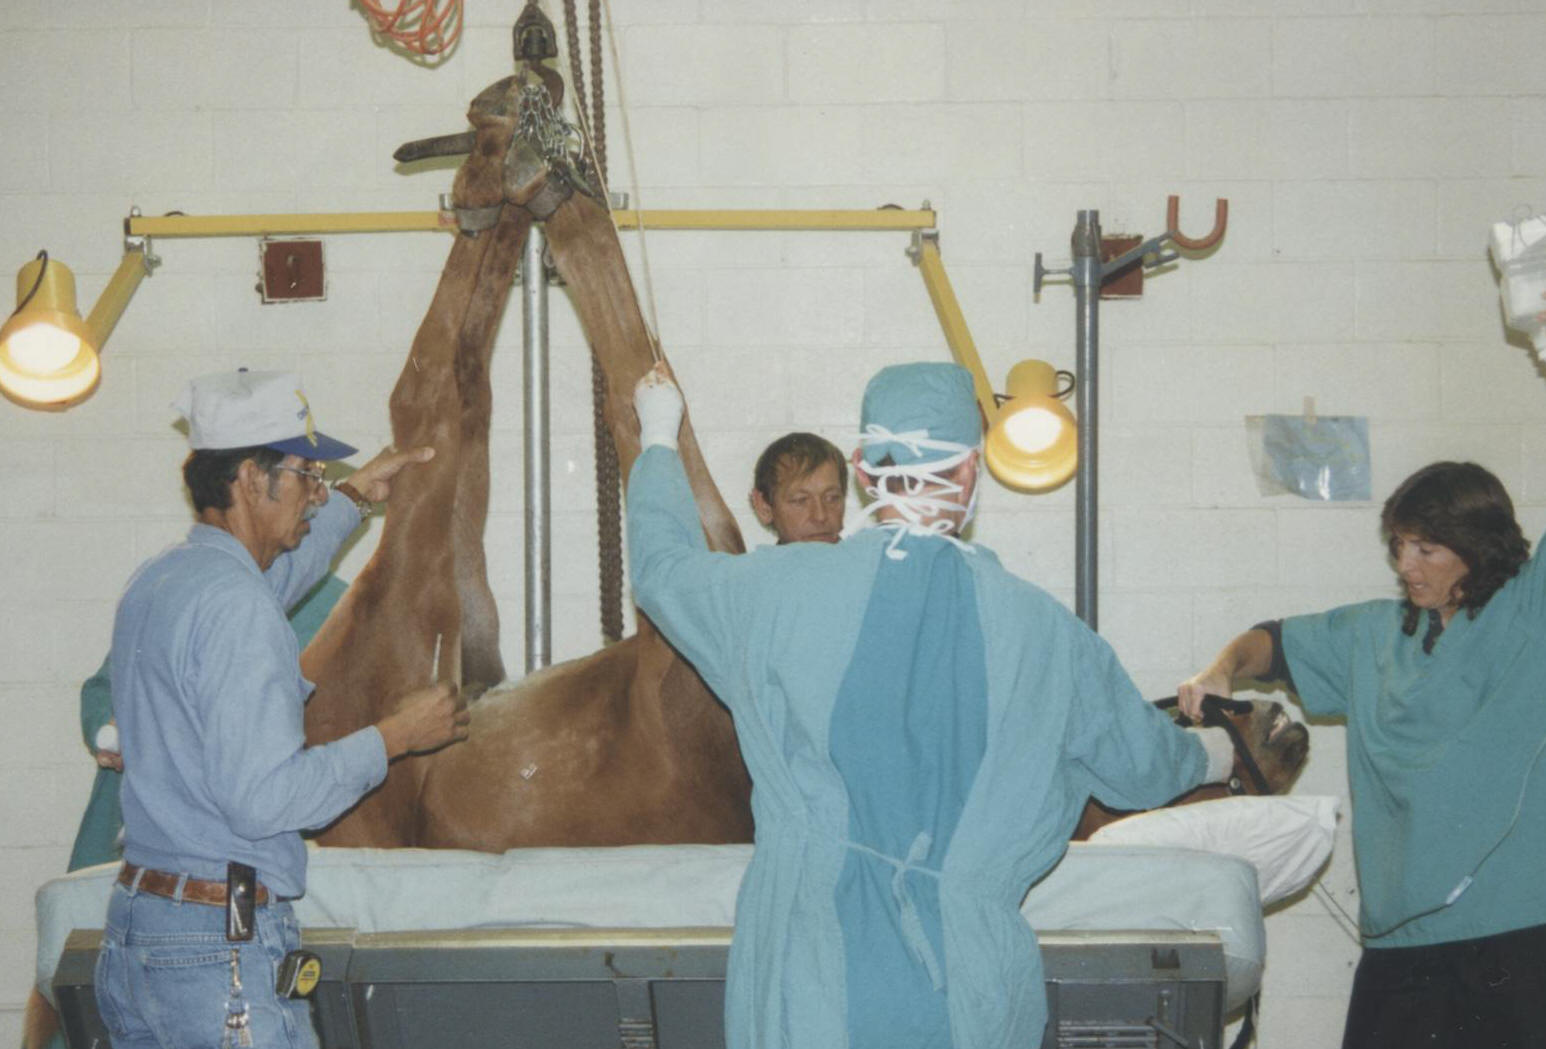 Cowboy is hoisted onto the operating table after being sedated.